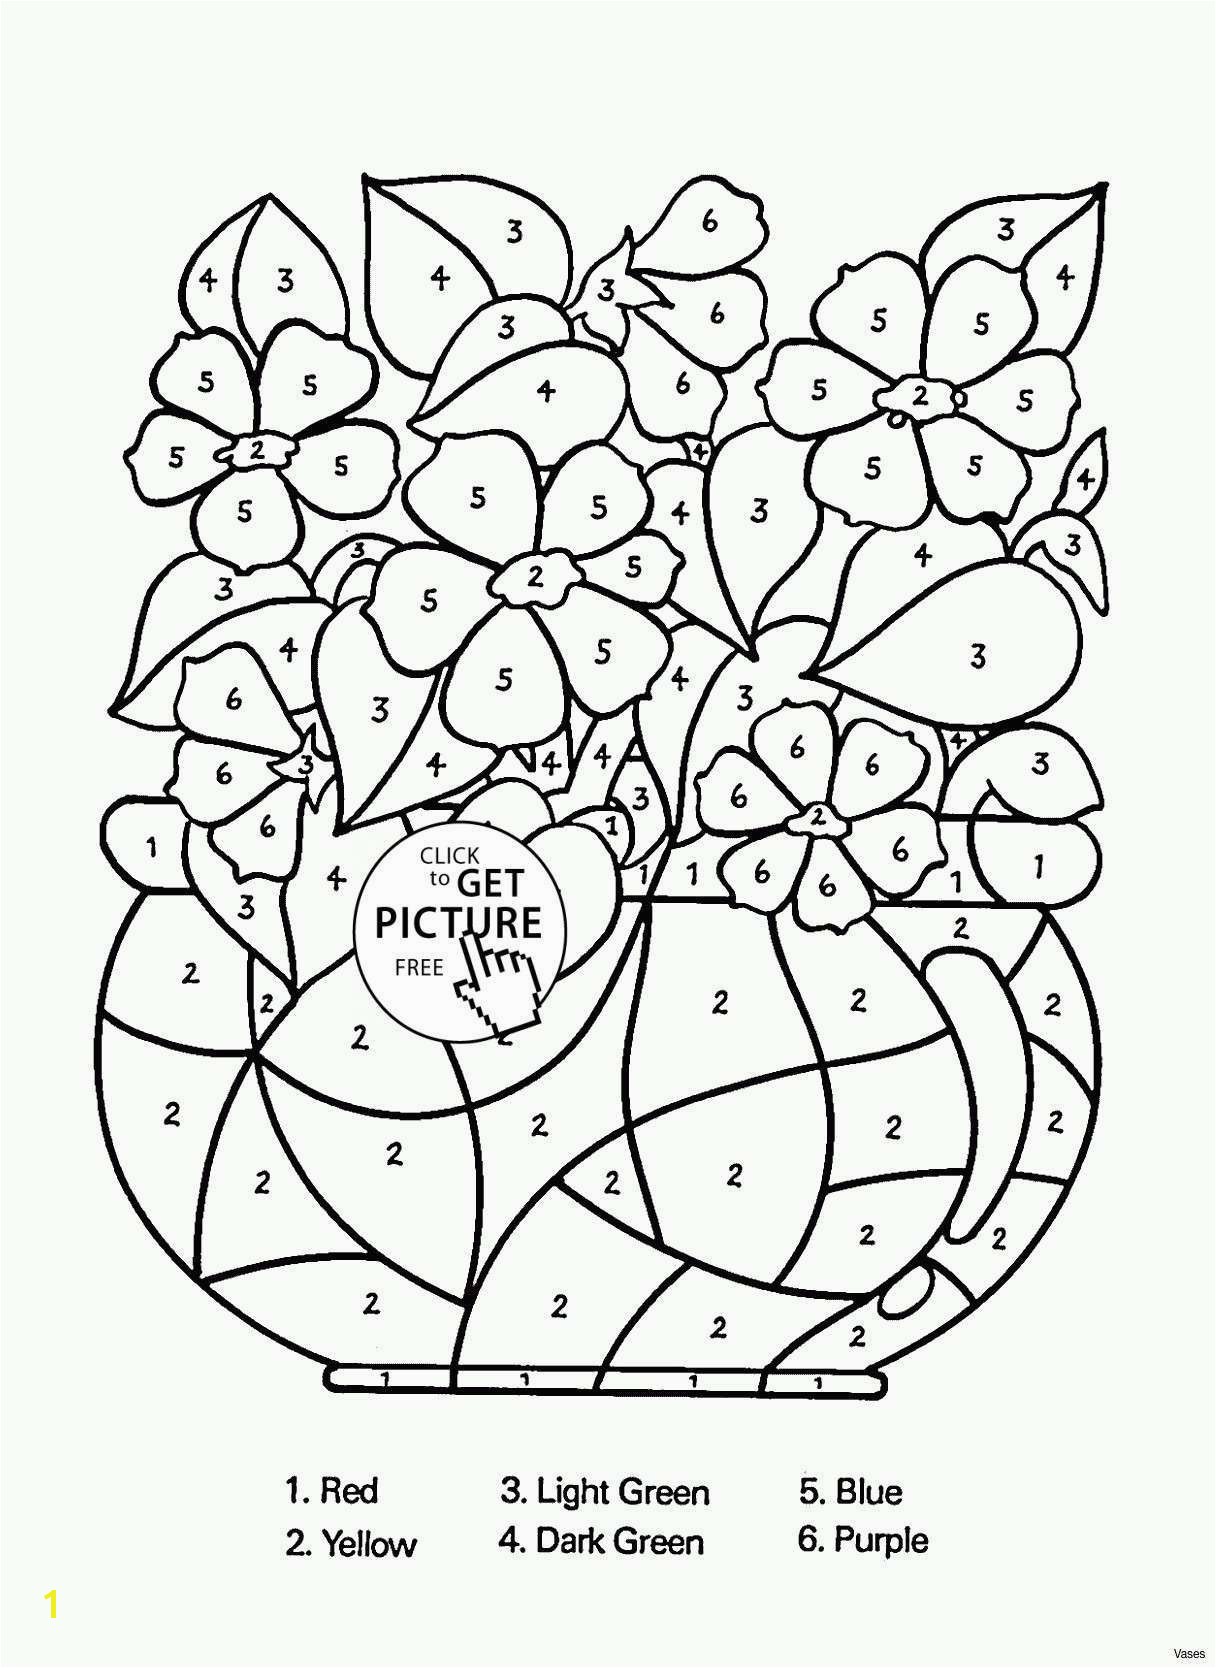 Coloring Pages for Girls Teens Download Cool Coloring Pages for Teenage Girls Download